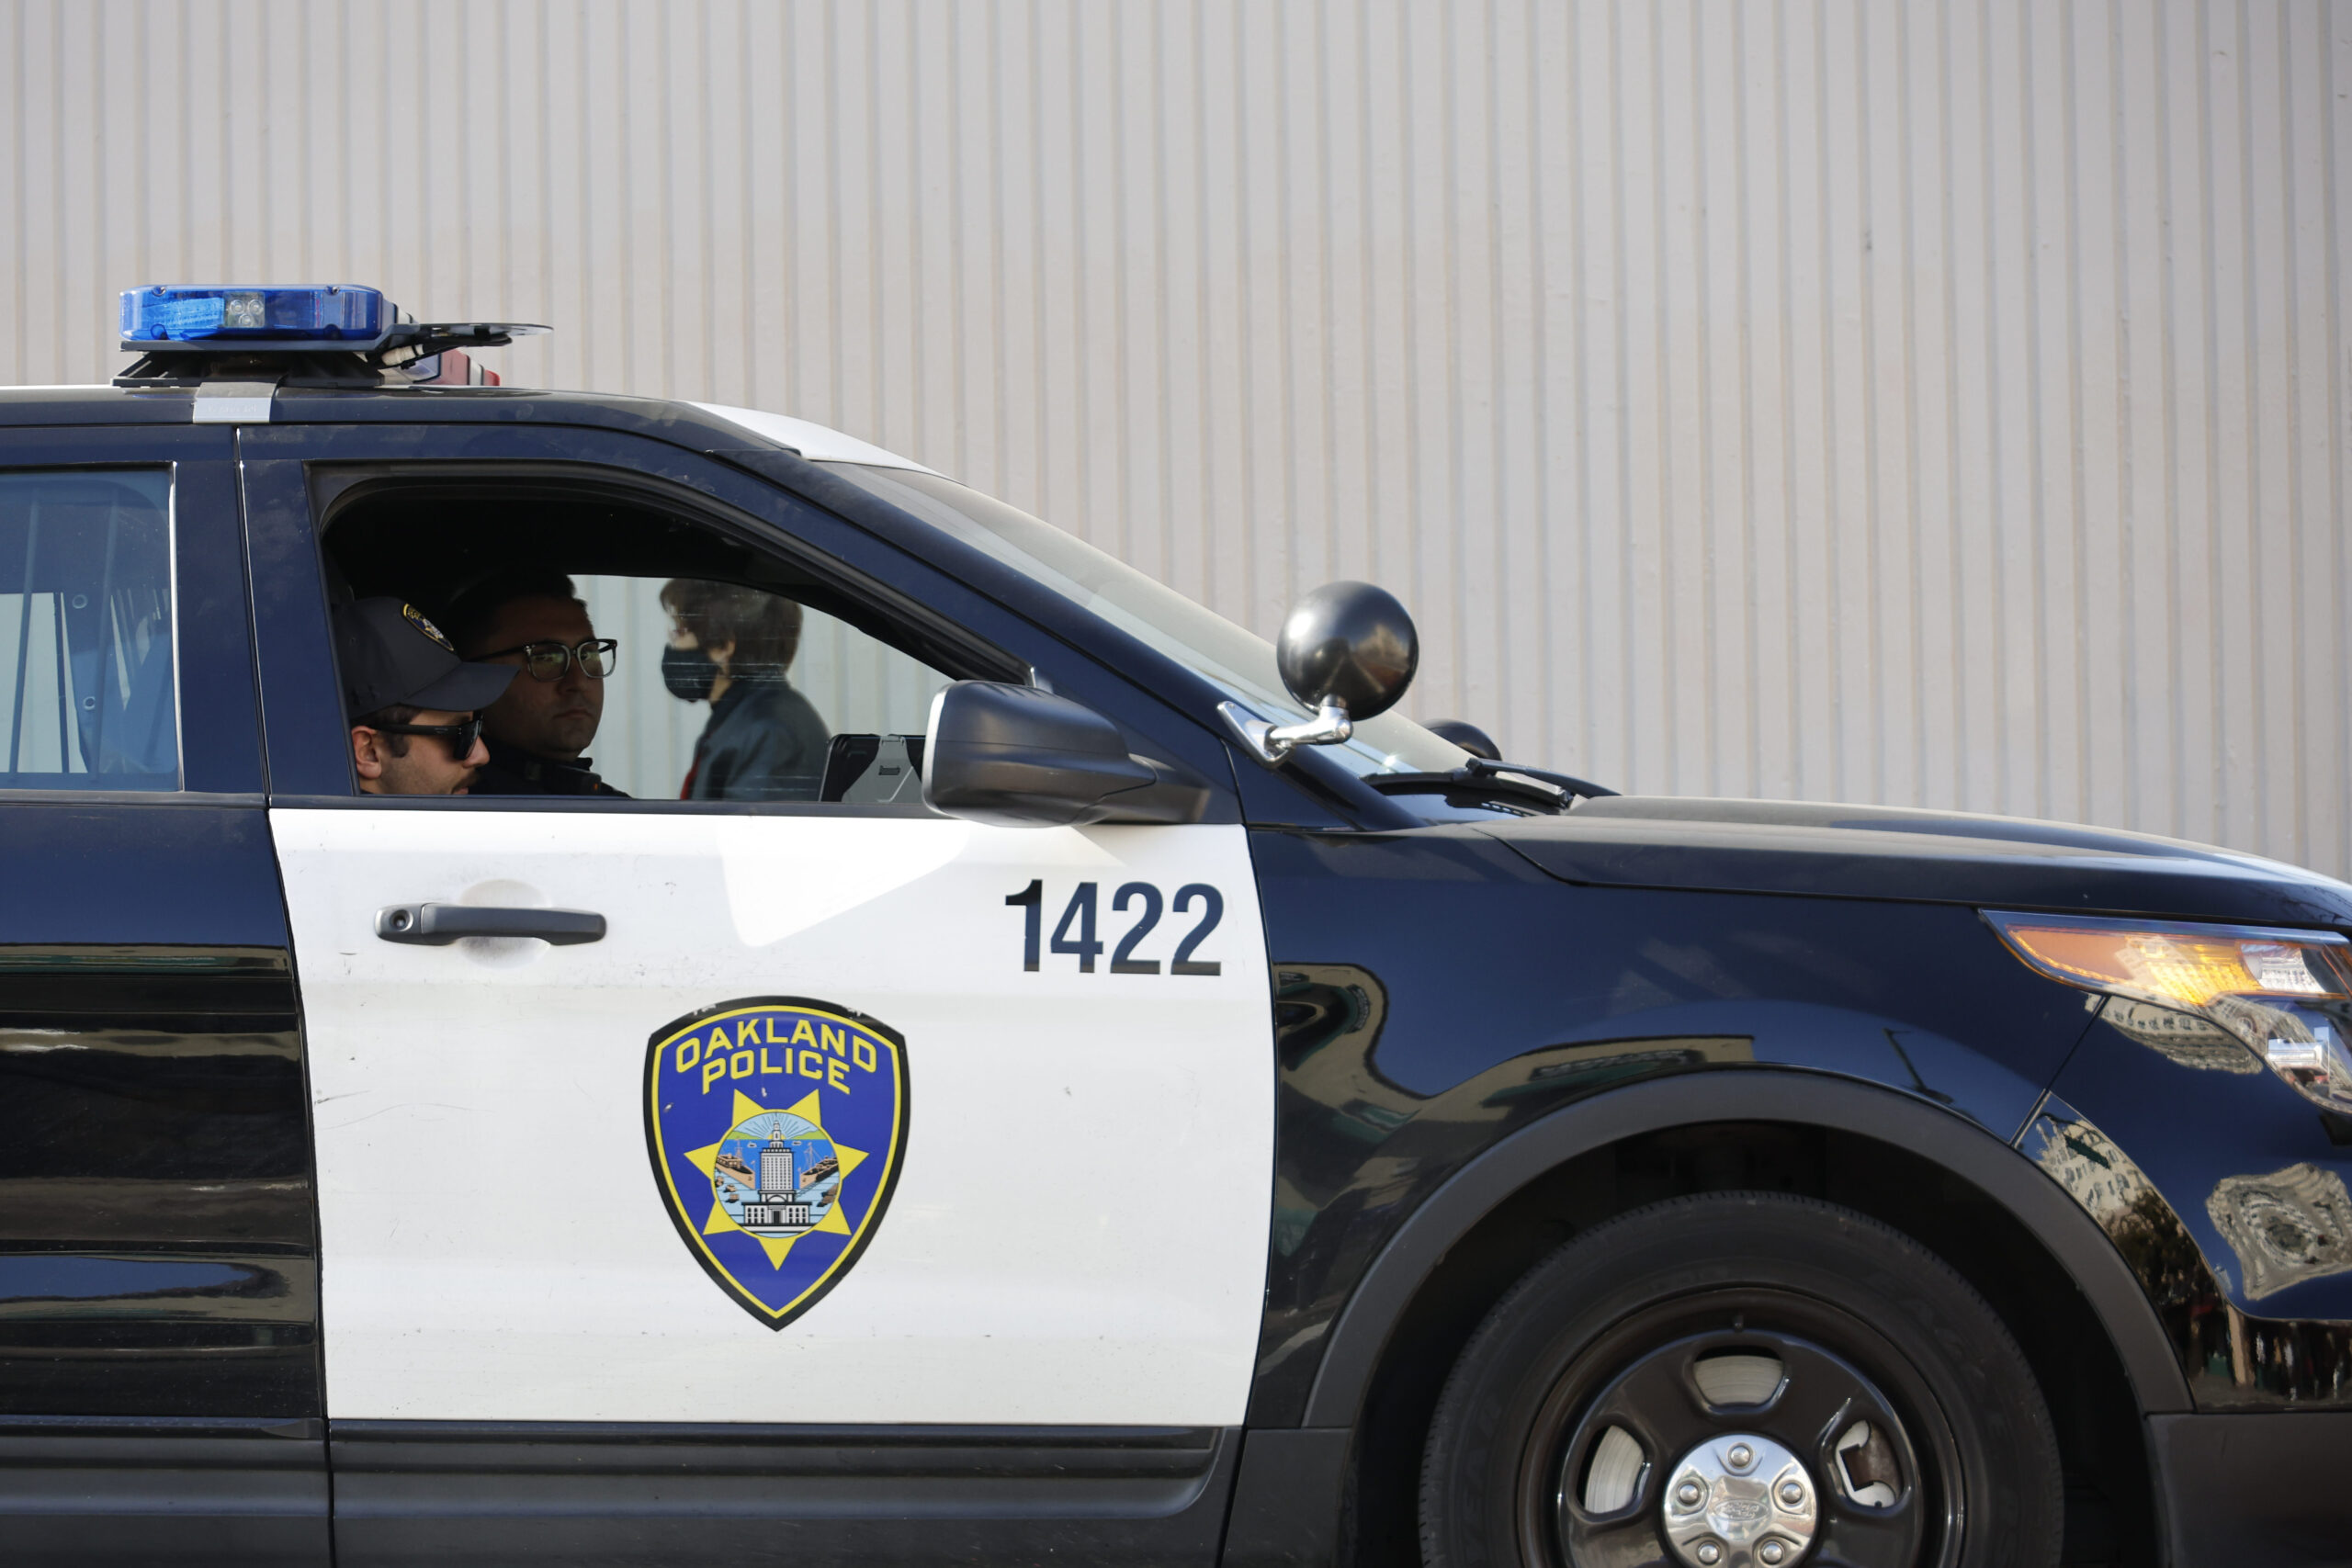 Oakland Police Union Blasts City Over 911 System Failure